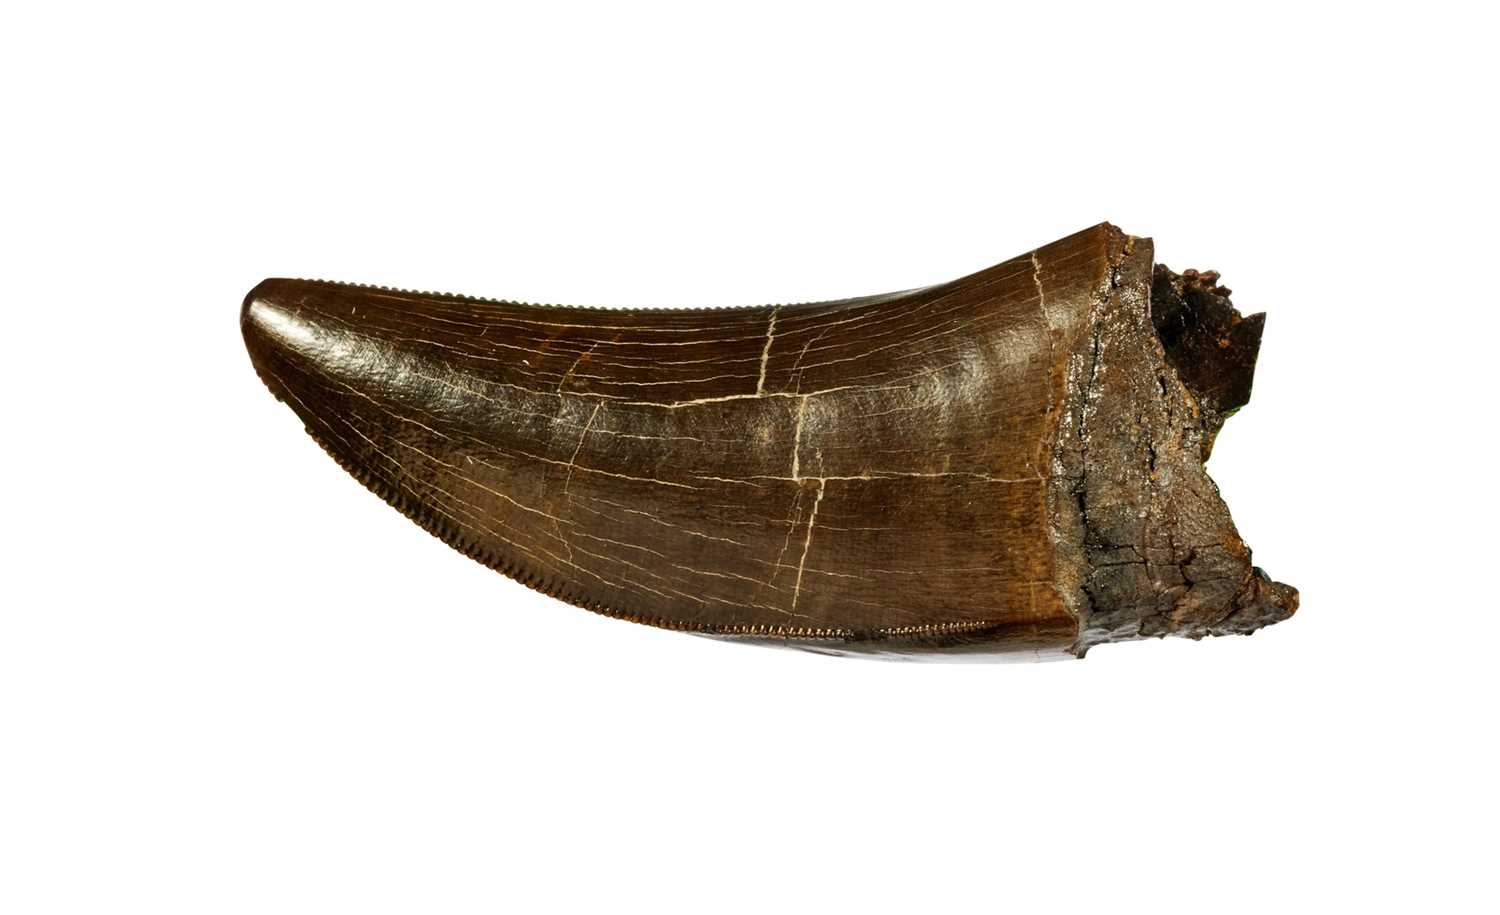 T. REX TOOTH: AN EXCEPTIONAL AND RARE ‘TYRANNOSAURUS REX’ DINOSAUR TOOTH FOSSIL SPECIMEN - Image 3 of 5